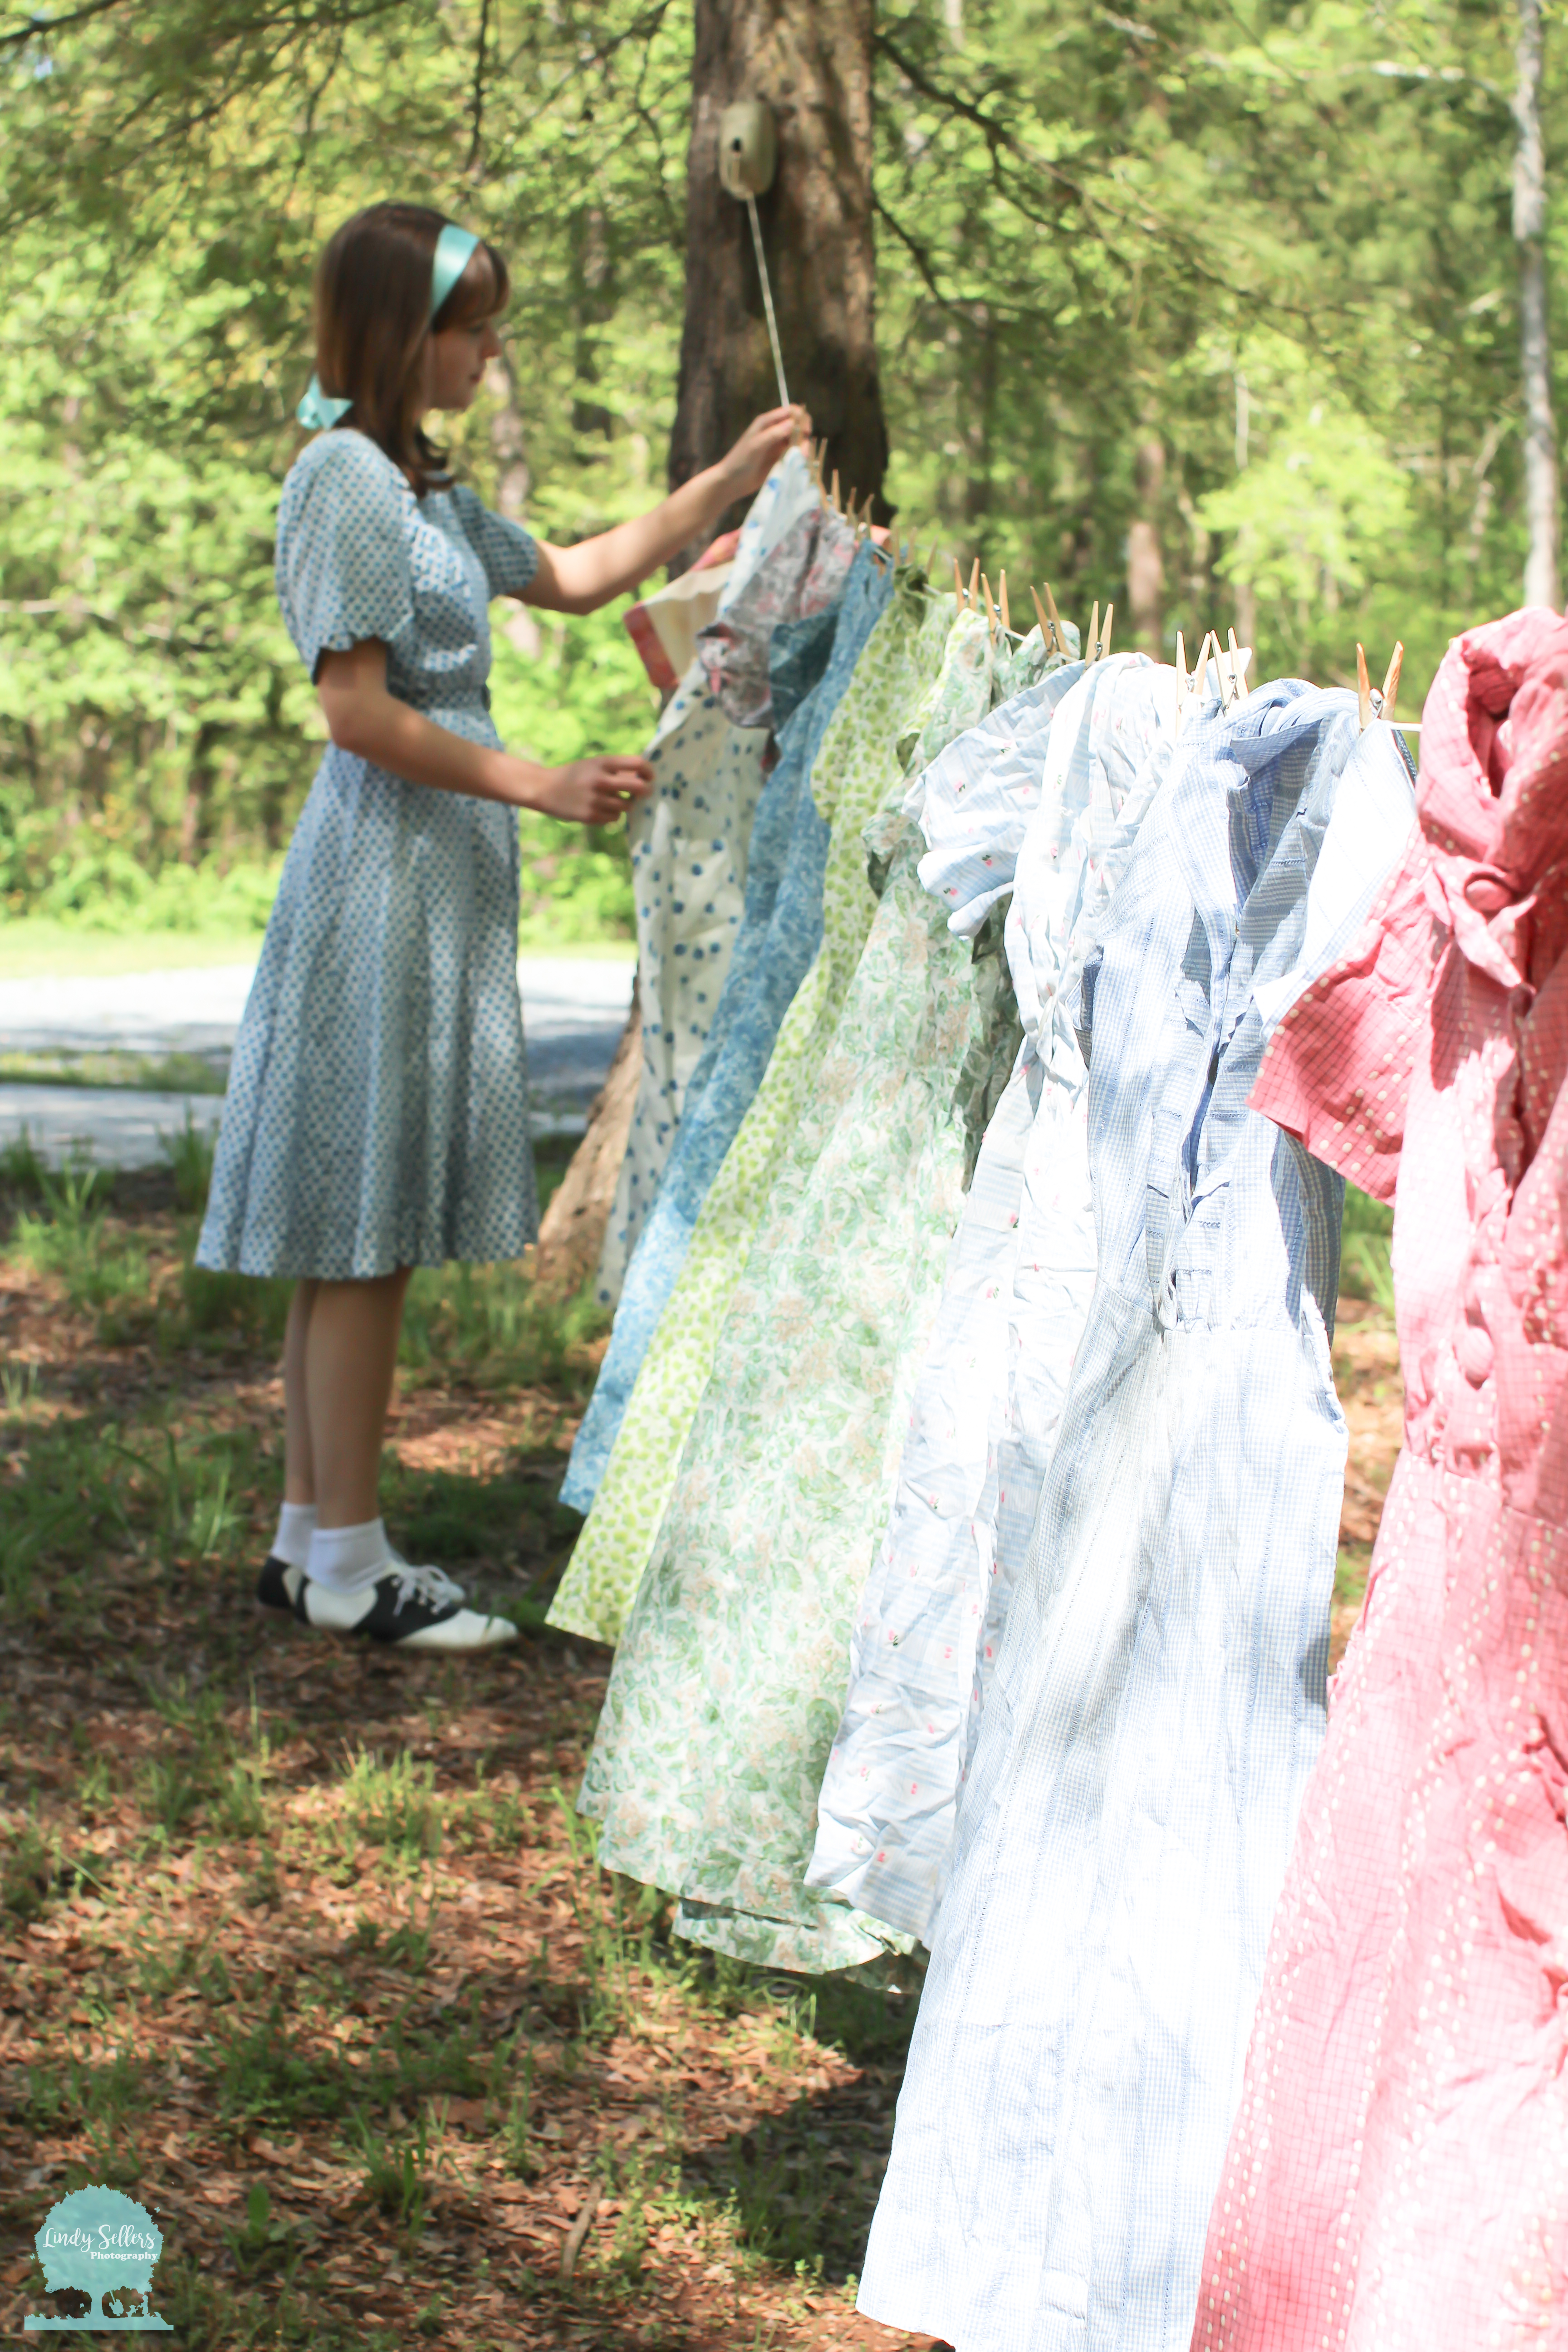 Unraveling the Mysteries of Vintage Dresses